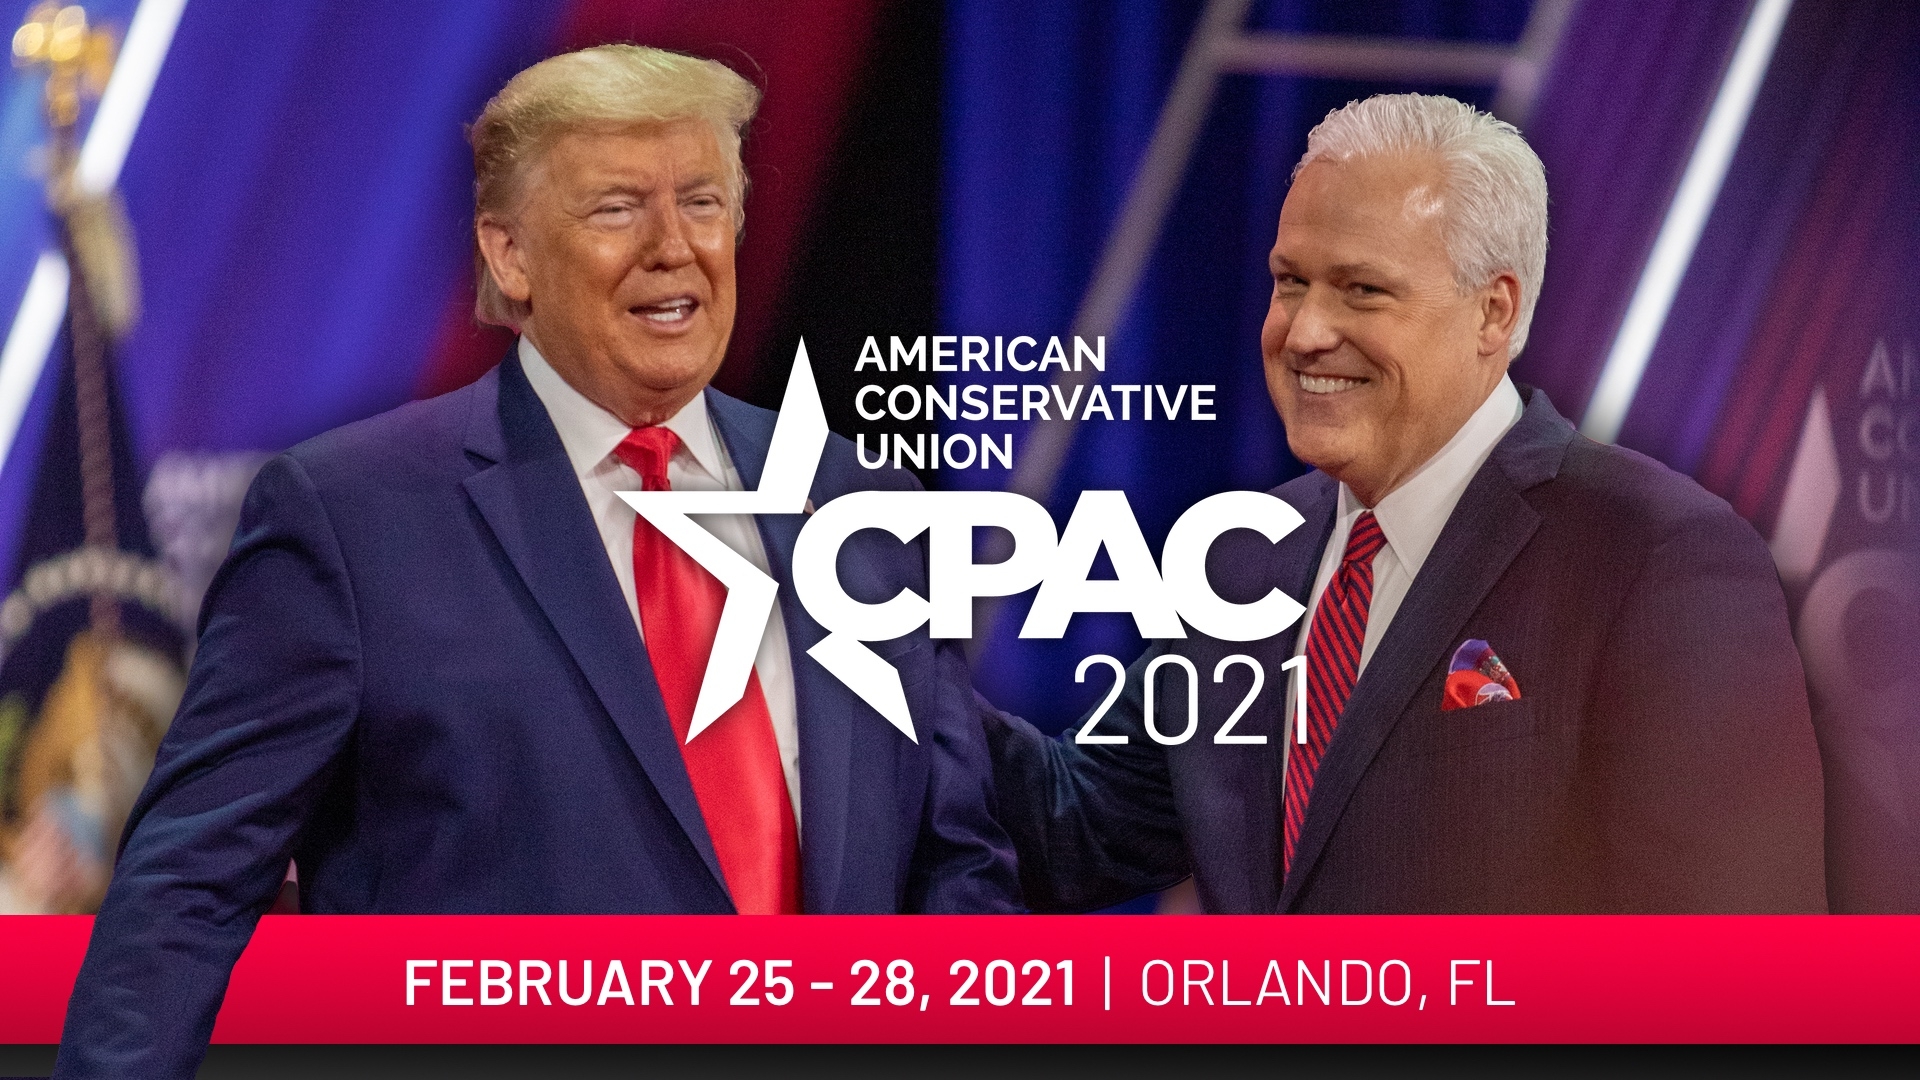 How to watch CPAC 2021: Live, Online, Speakers and Schedule | KnowInsiders